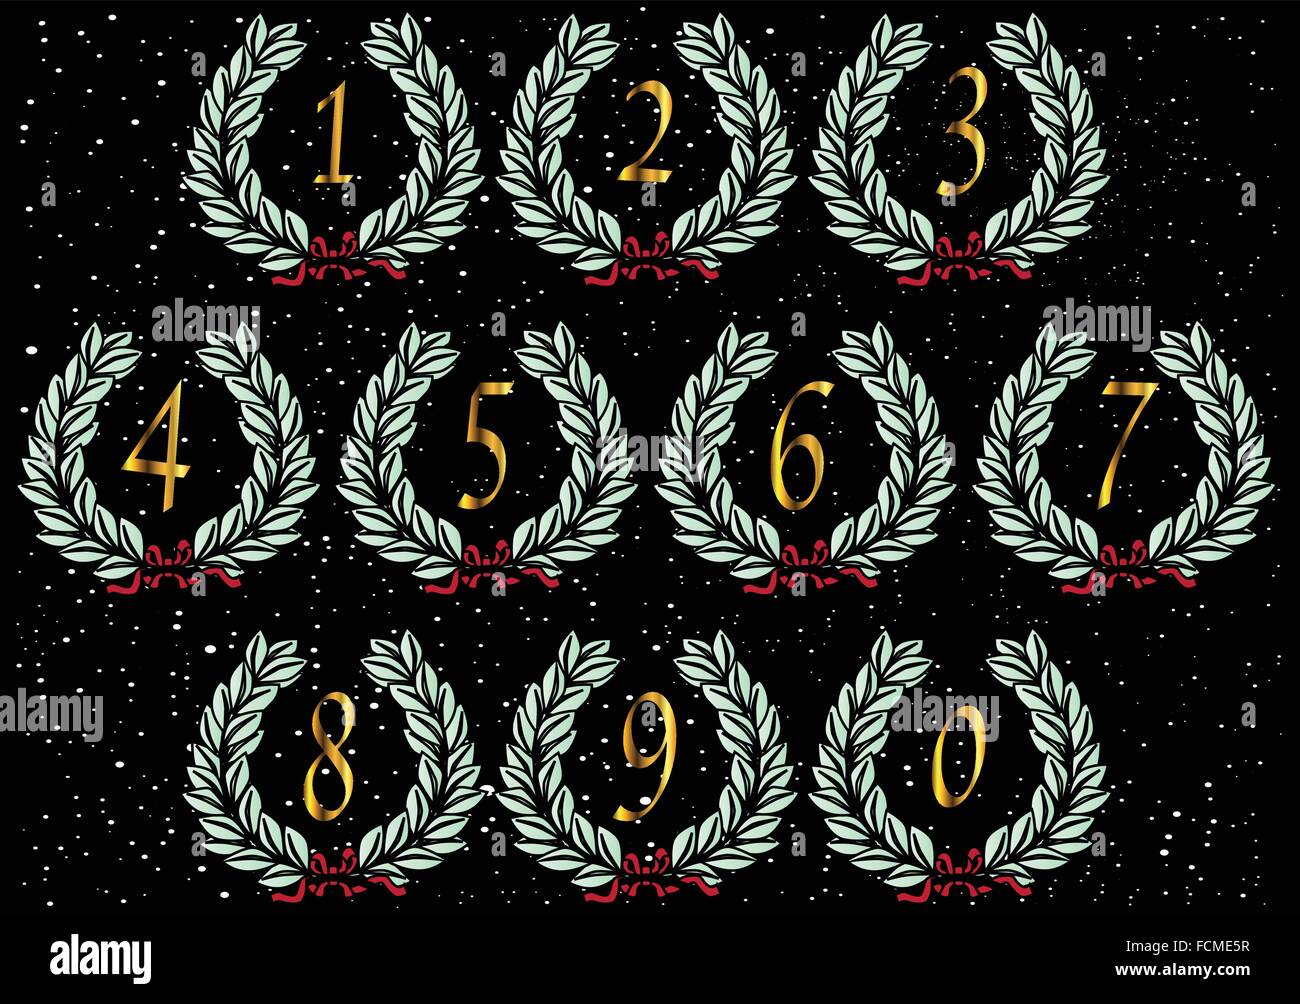 Wreaths with numbers set on a star spangled background background Stock Vector